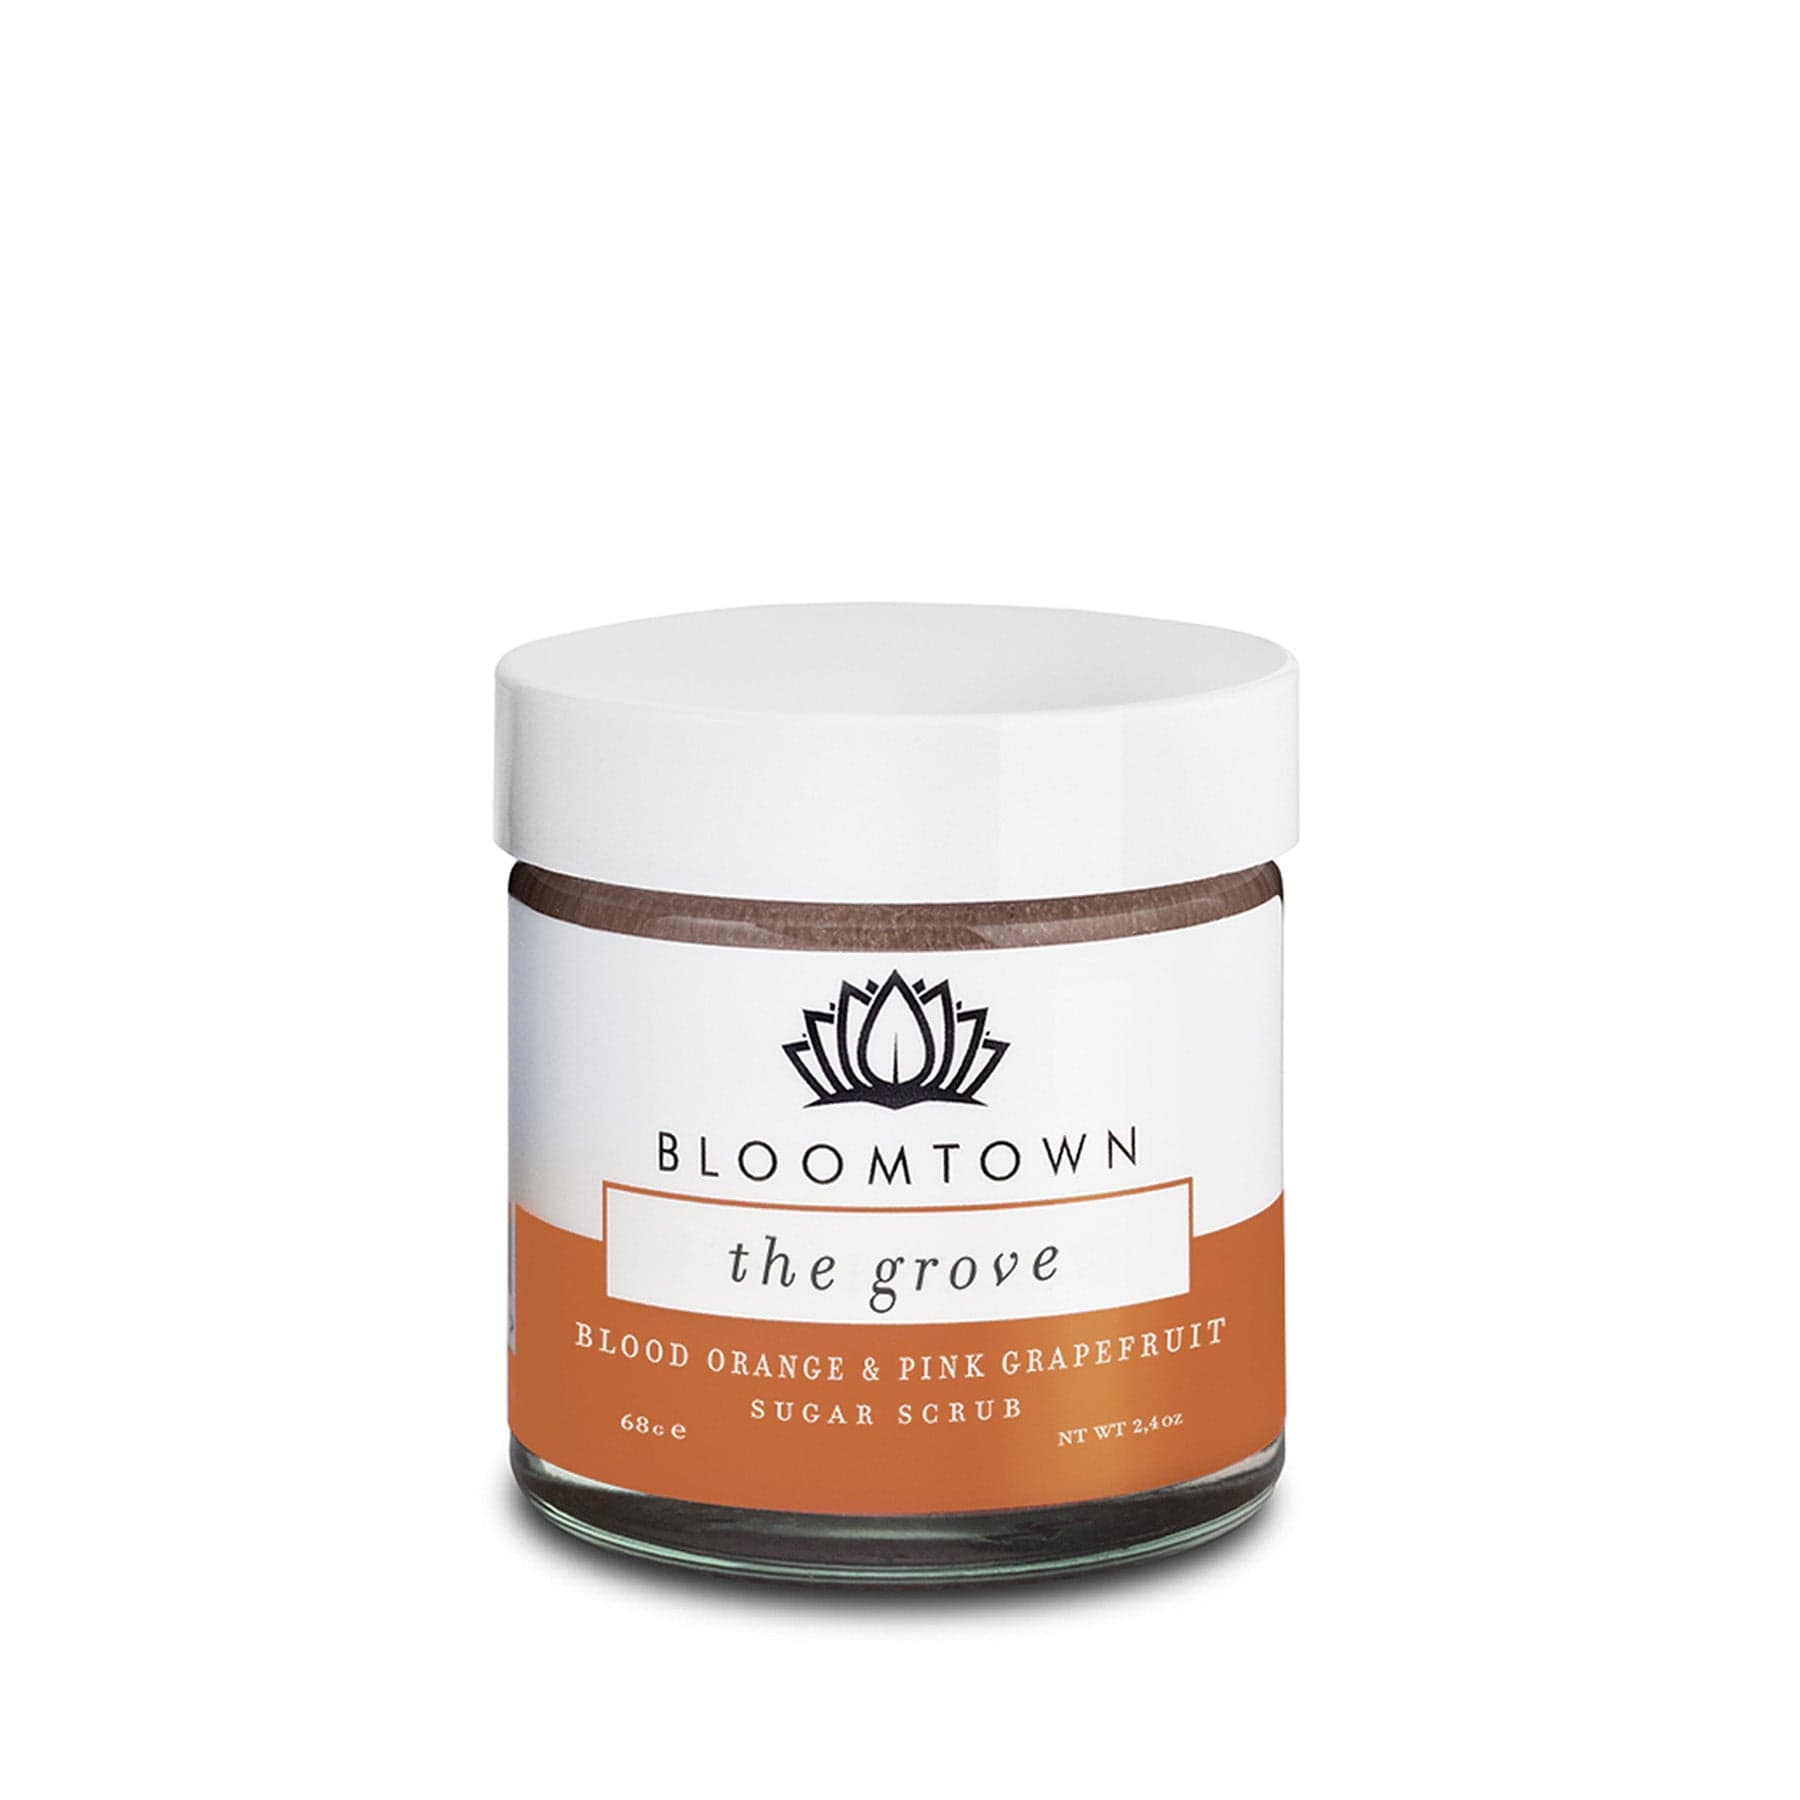 Bloomtown The Grove Blood Orange & Pink Grapefruit Sugar Scrub in white jar with brown and orange label on isolated background.